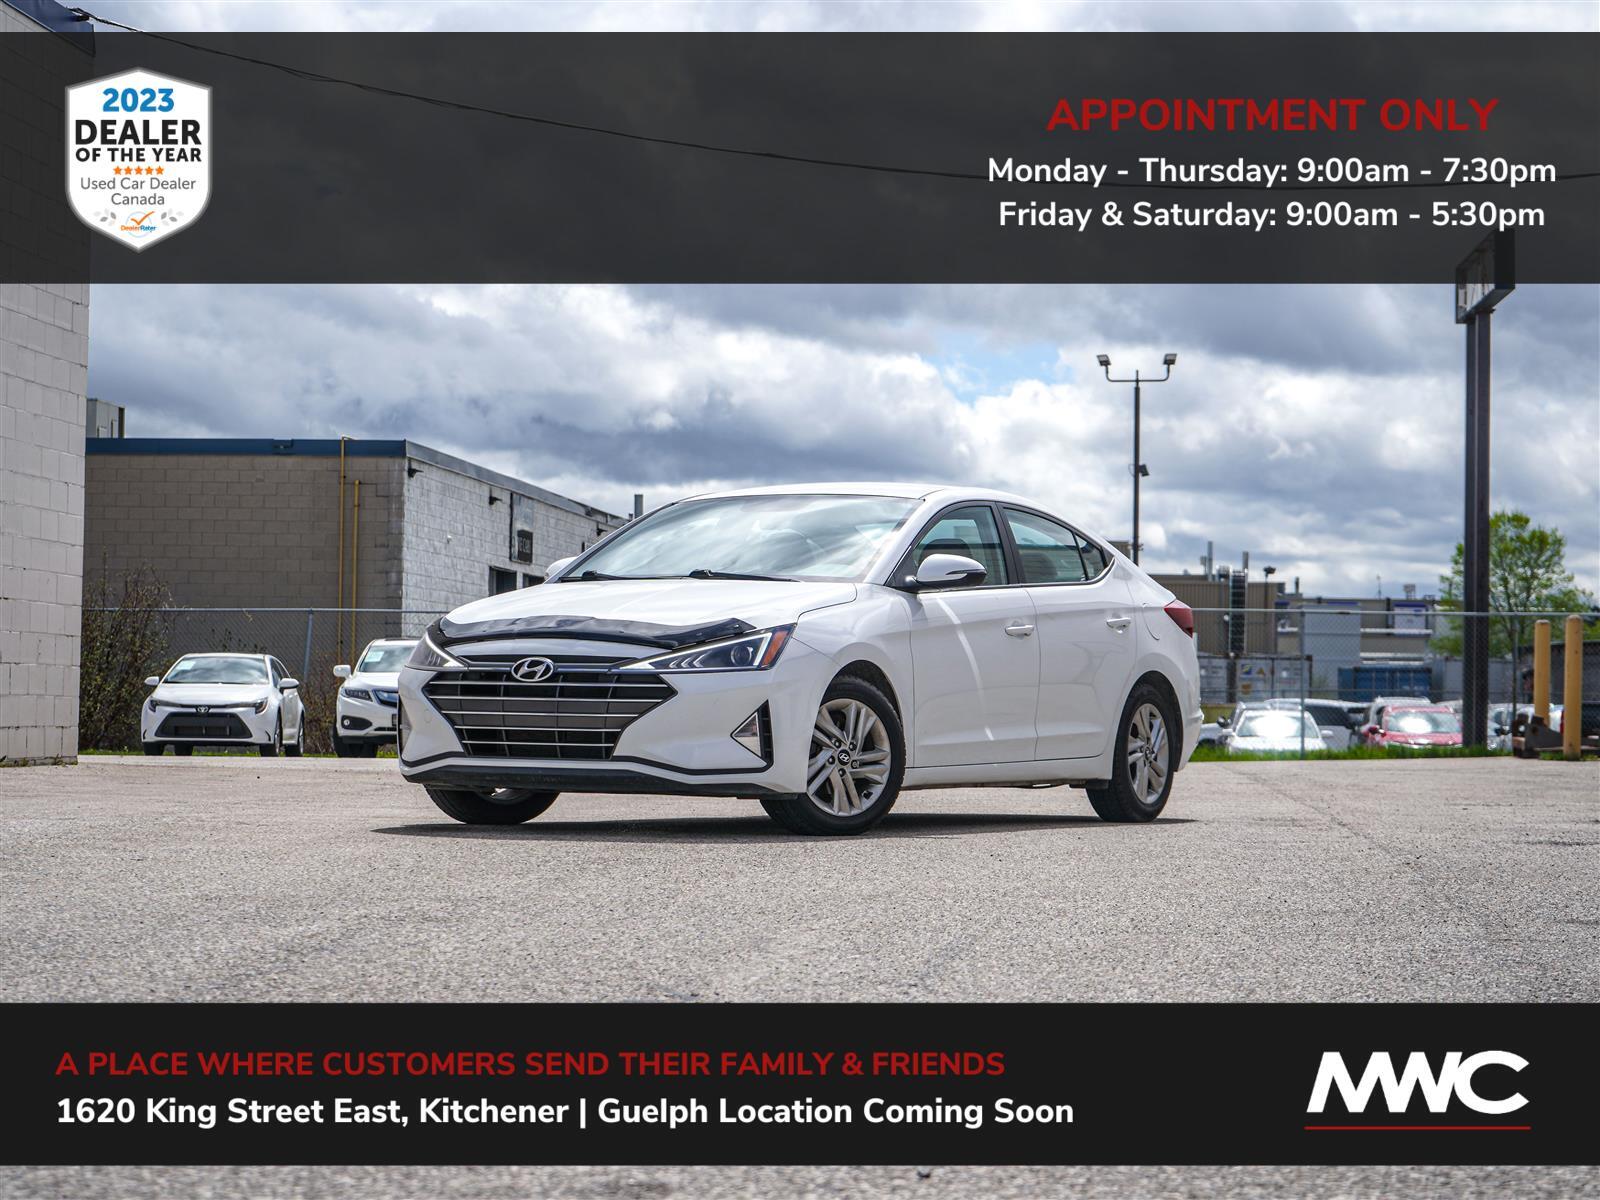 2019 Hyundai Elantra PREFERRED | IN GUELPH, BY APPT. ONLY